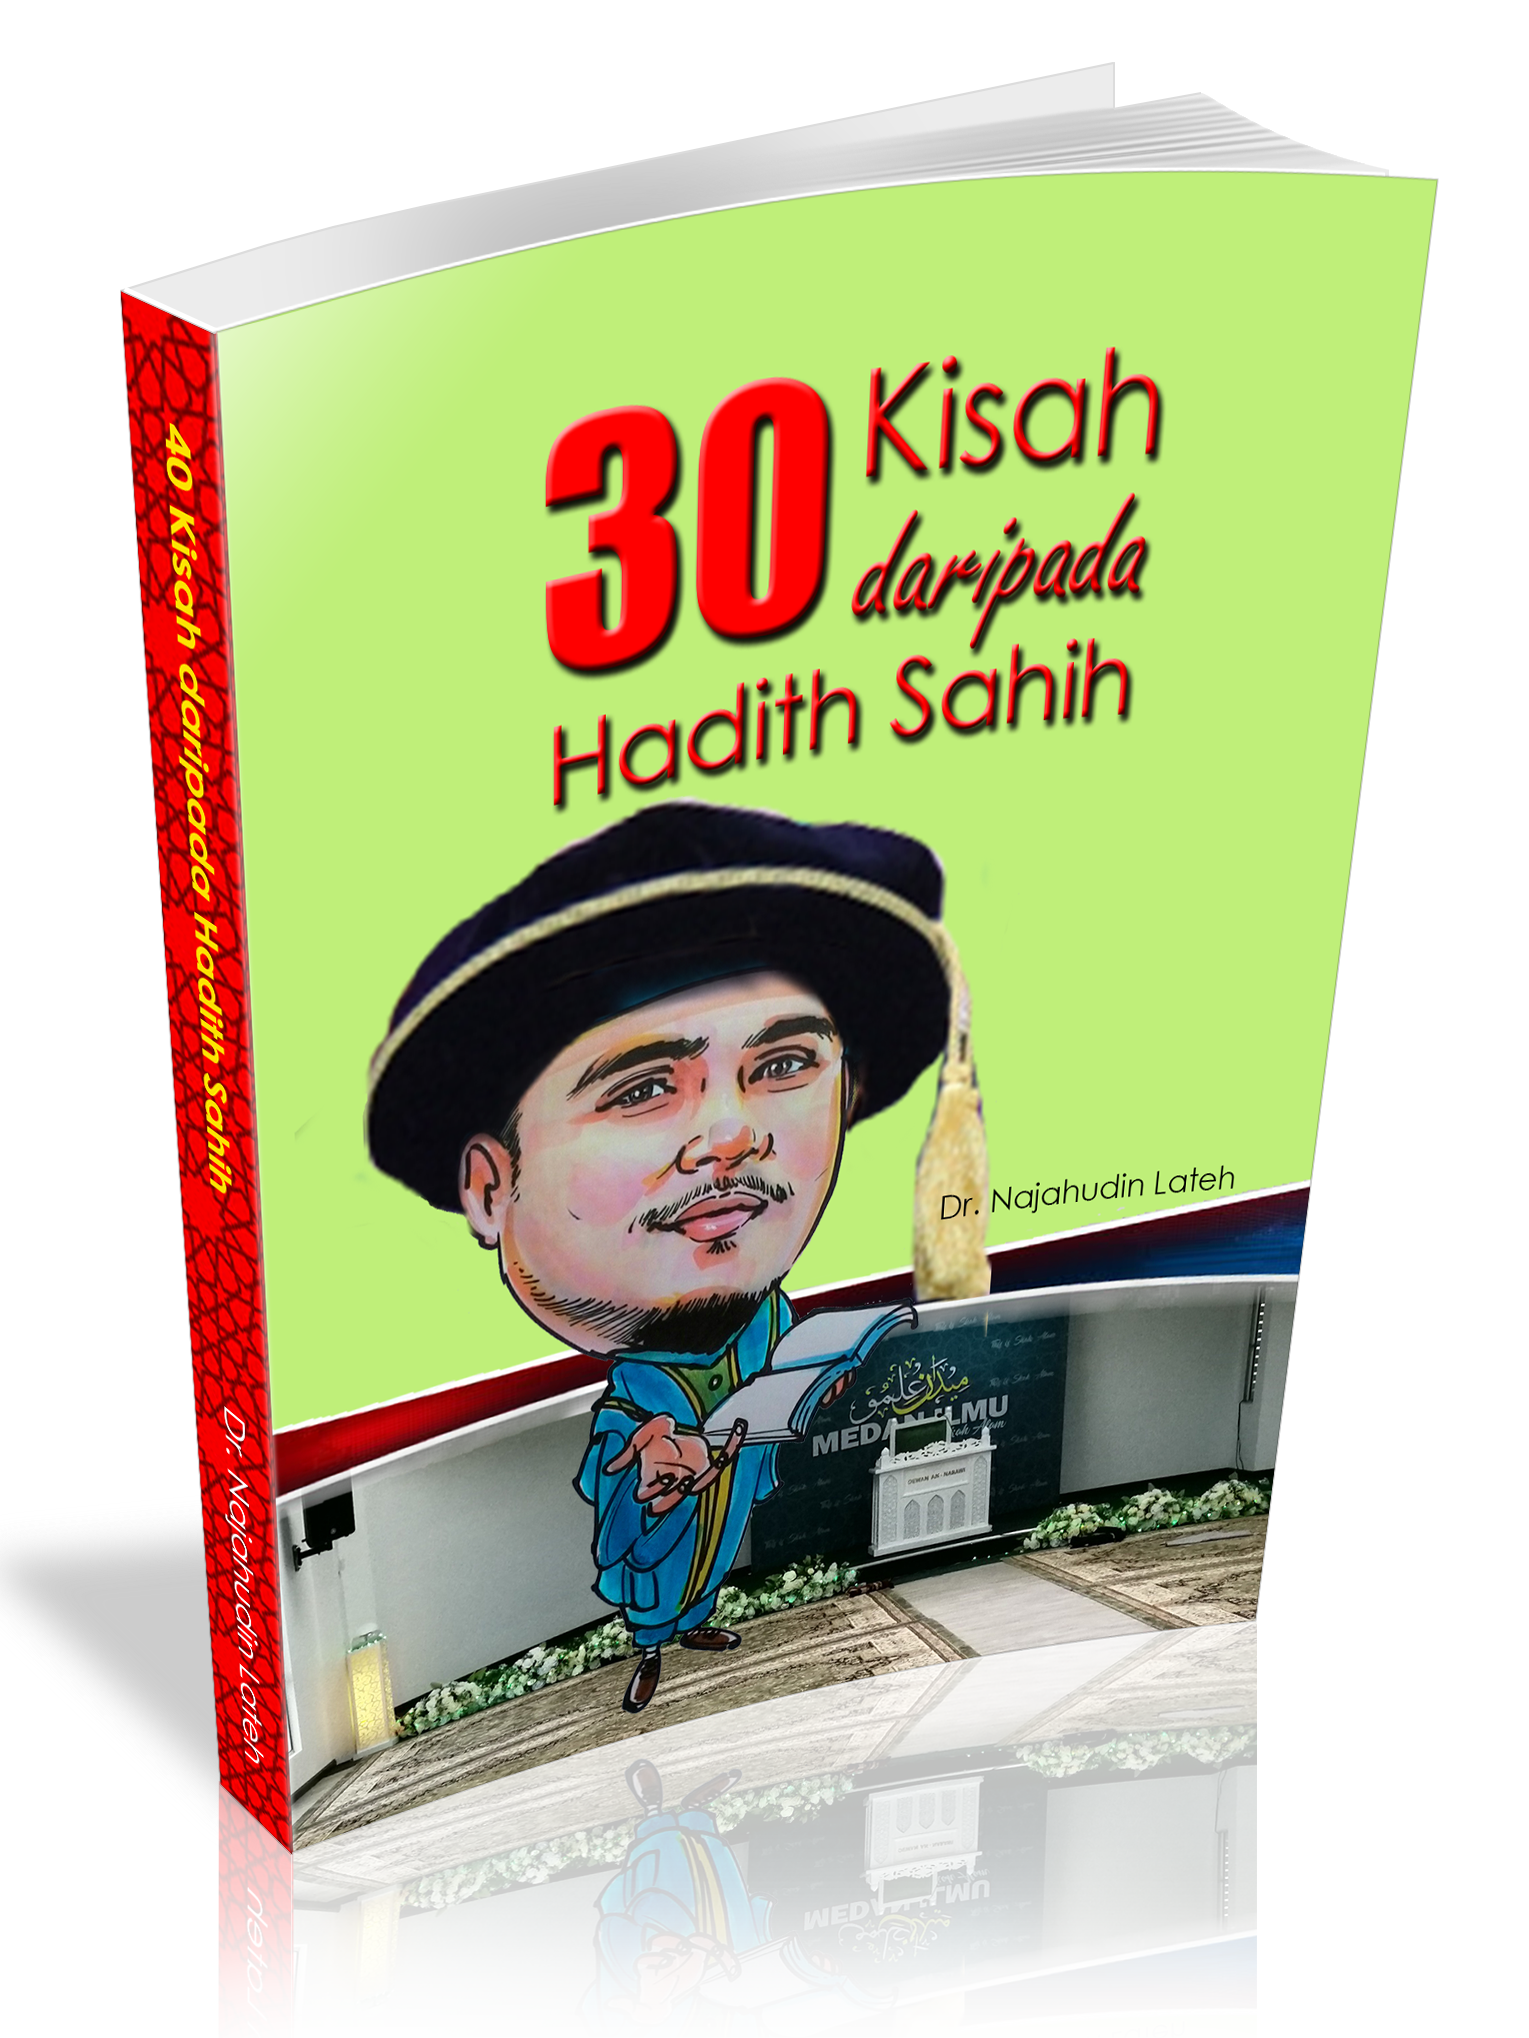 Description: Description: Description: Description: Description: Description: D:\Dropbox\BUKU my\13. Fahami Sirah dalam 60 minit\Fahami Sirah dalam 60 Minit_action.png